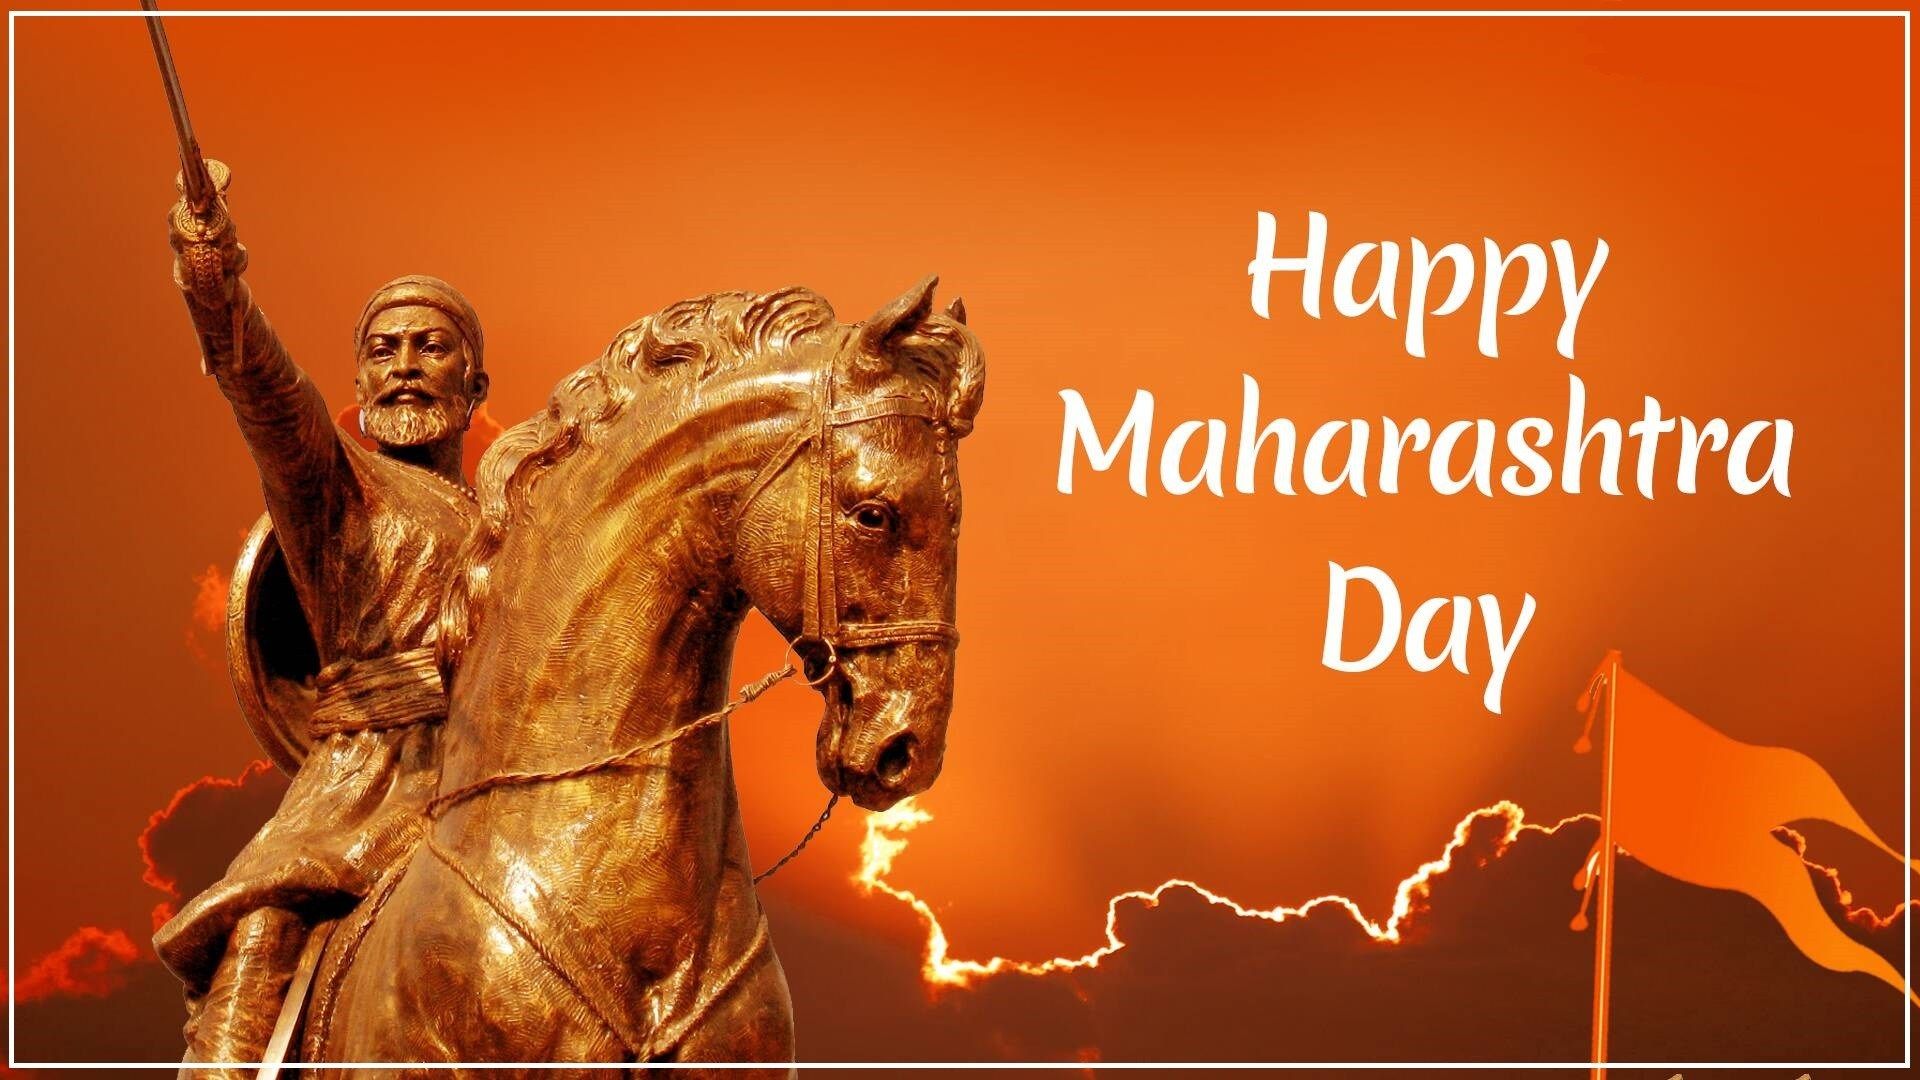 Happy Maharashtra Day Image, Wallpaper and Best SMS 20